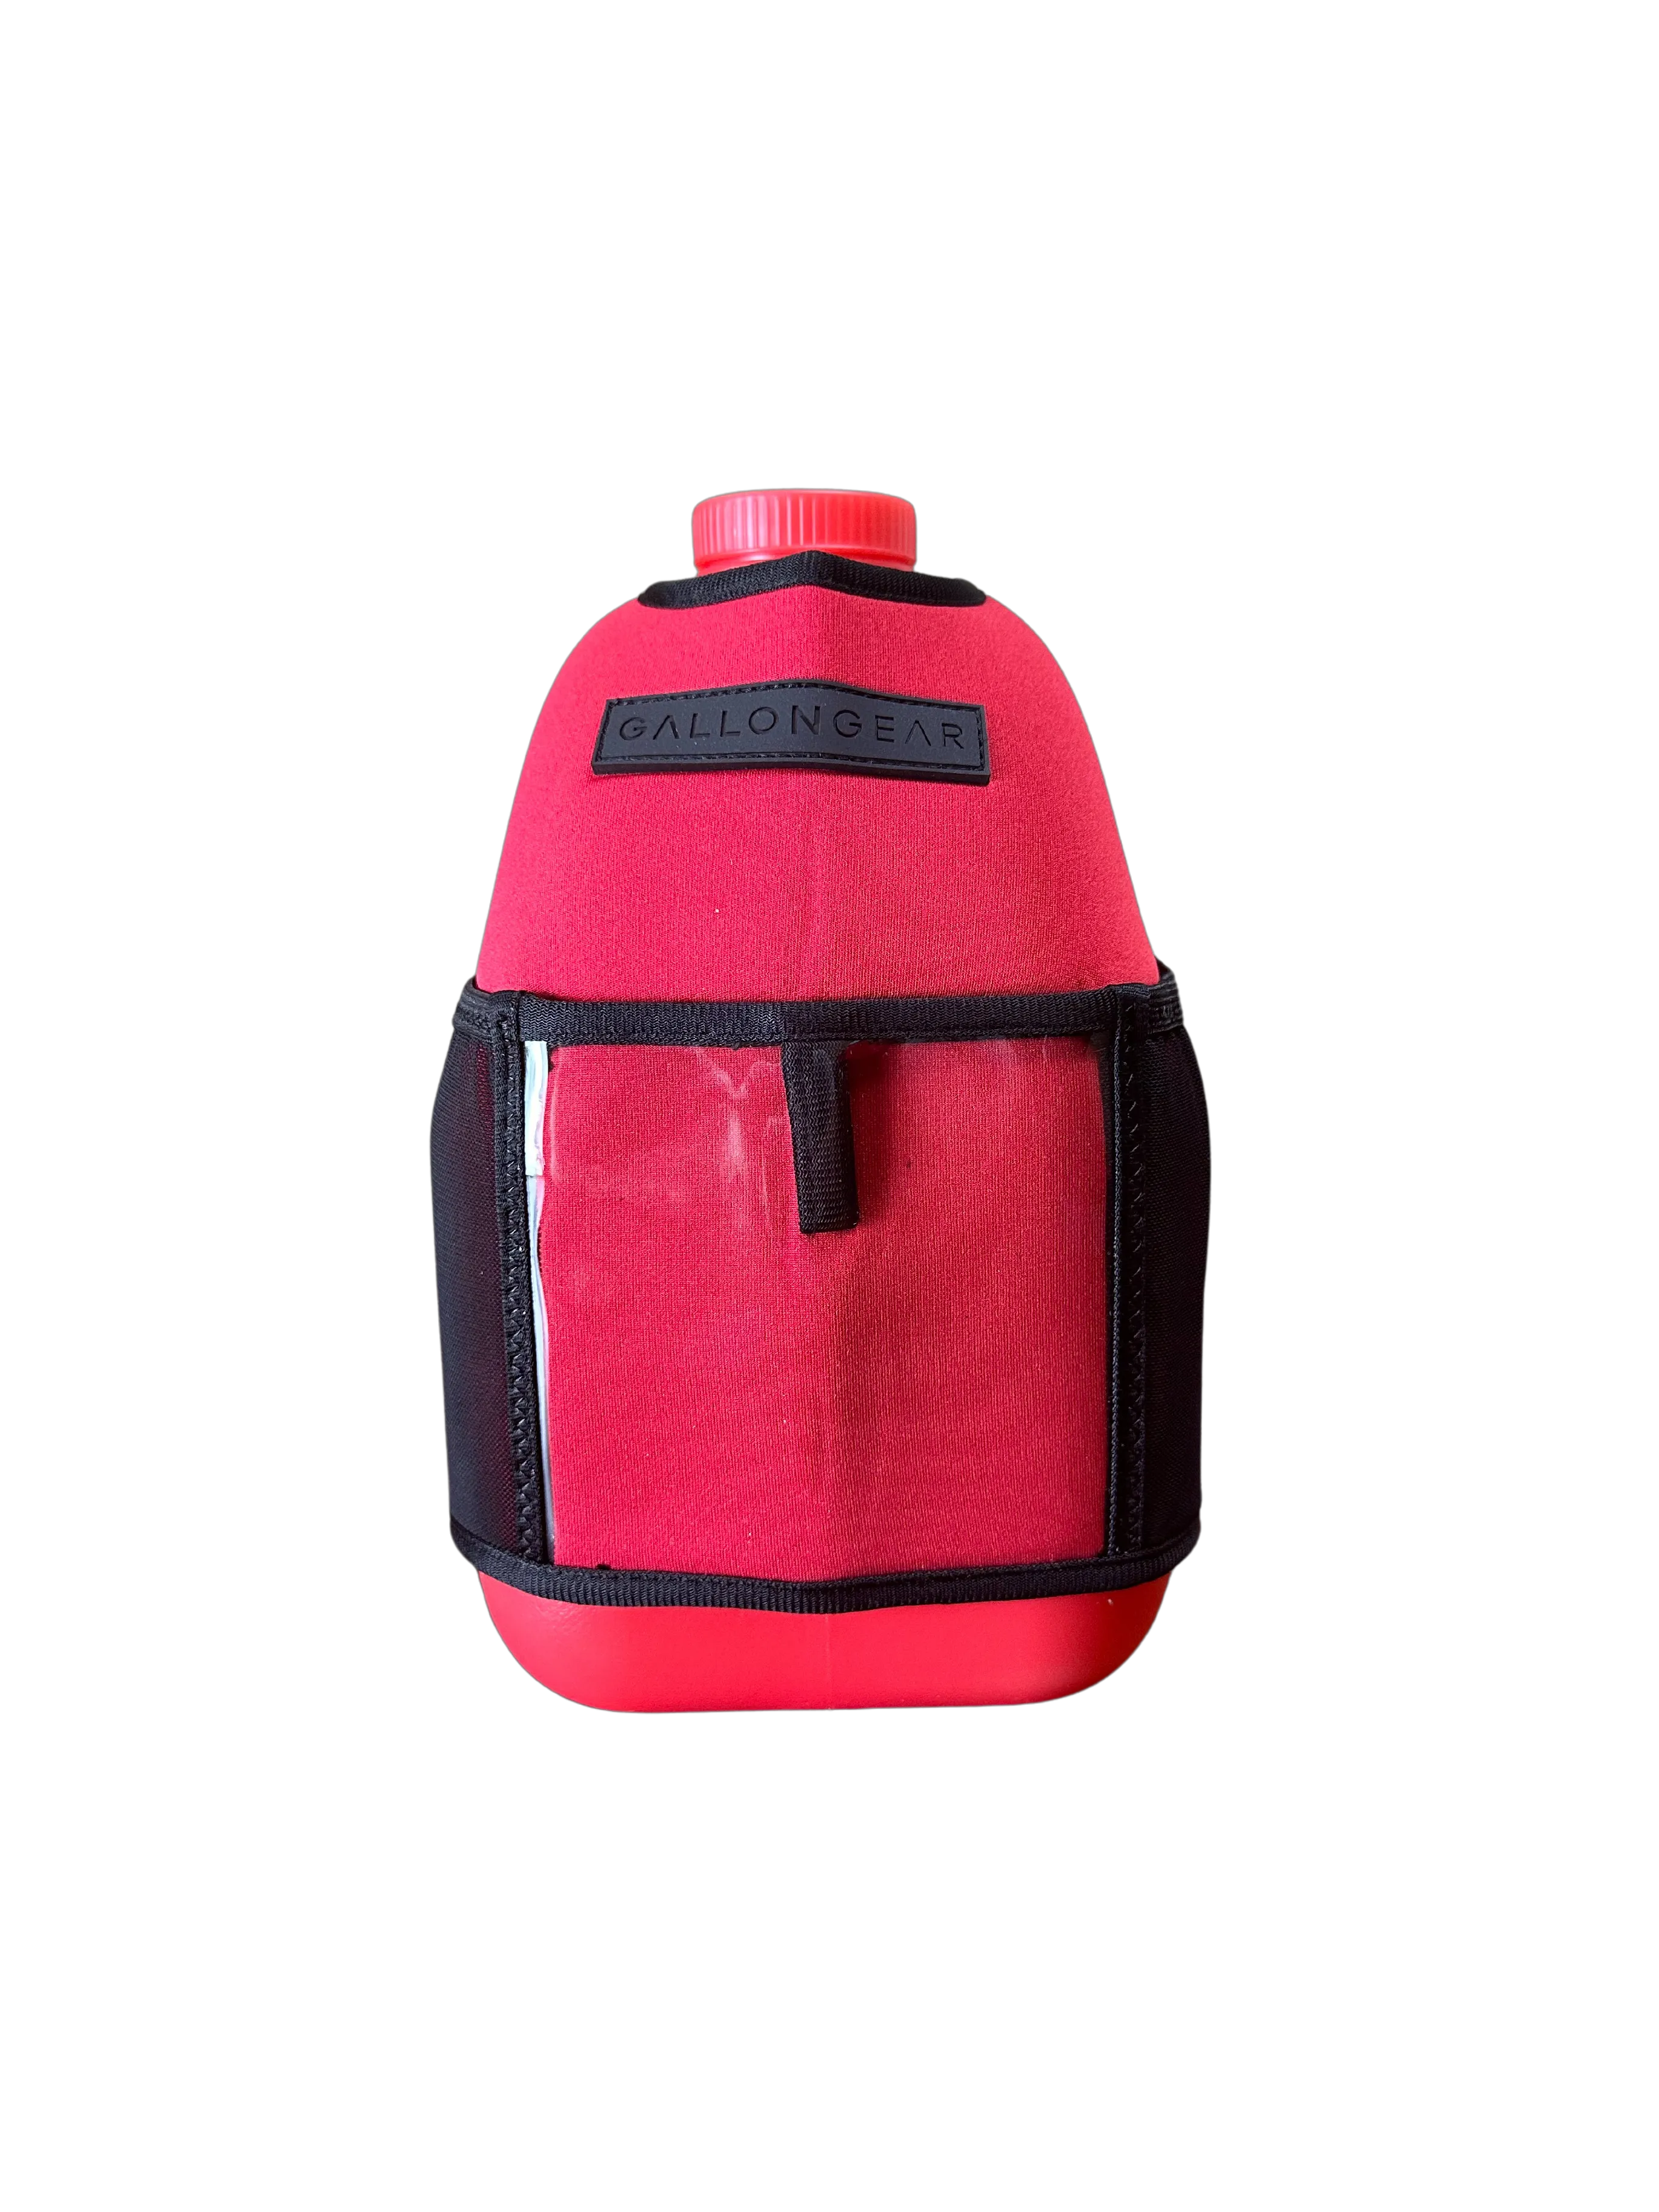 (1 GALLON COMBO) Red Jug / Red/Black Logo Booty